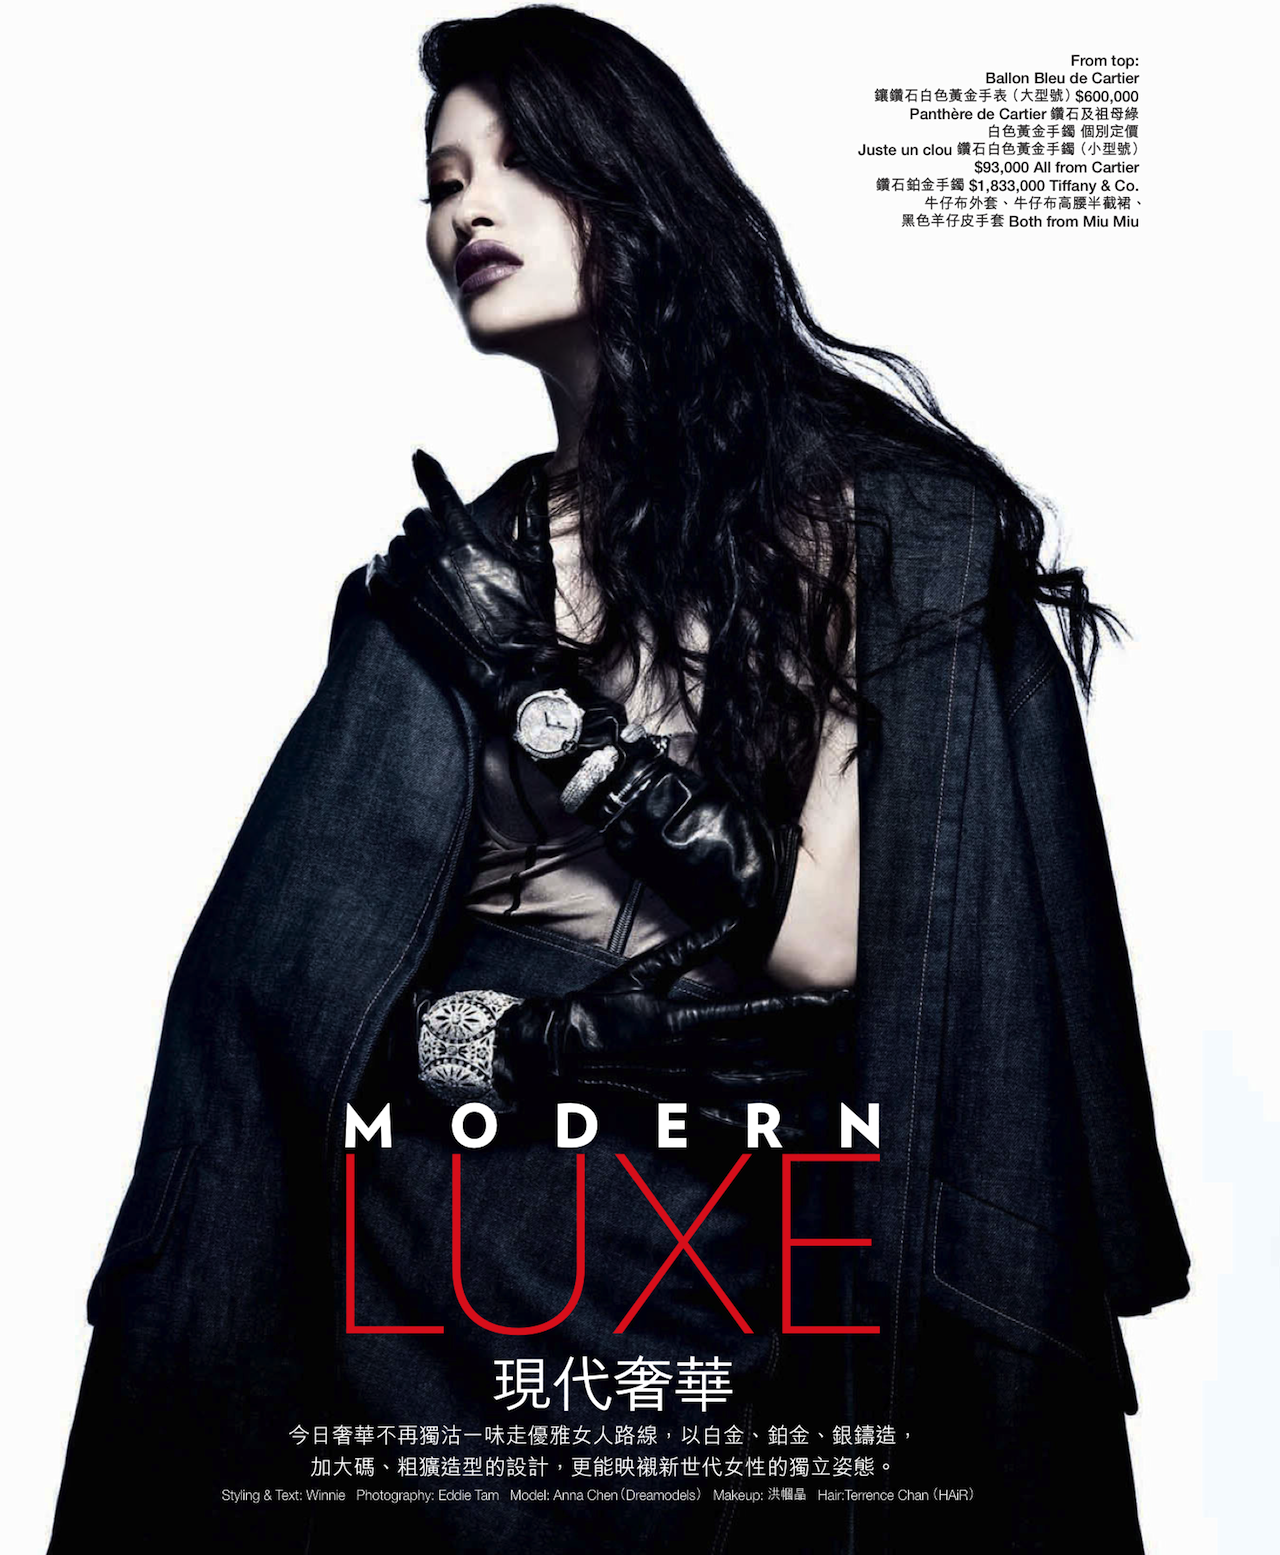 modern luxe: anna chen by eddie tam for marie claire taiwan may 2013 ...